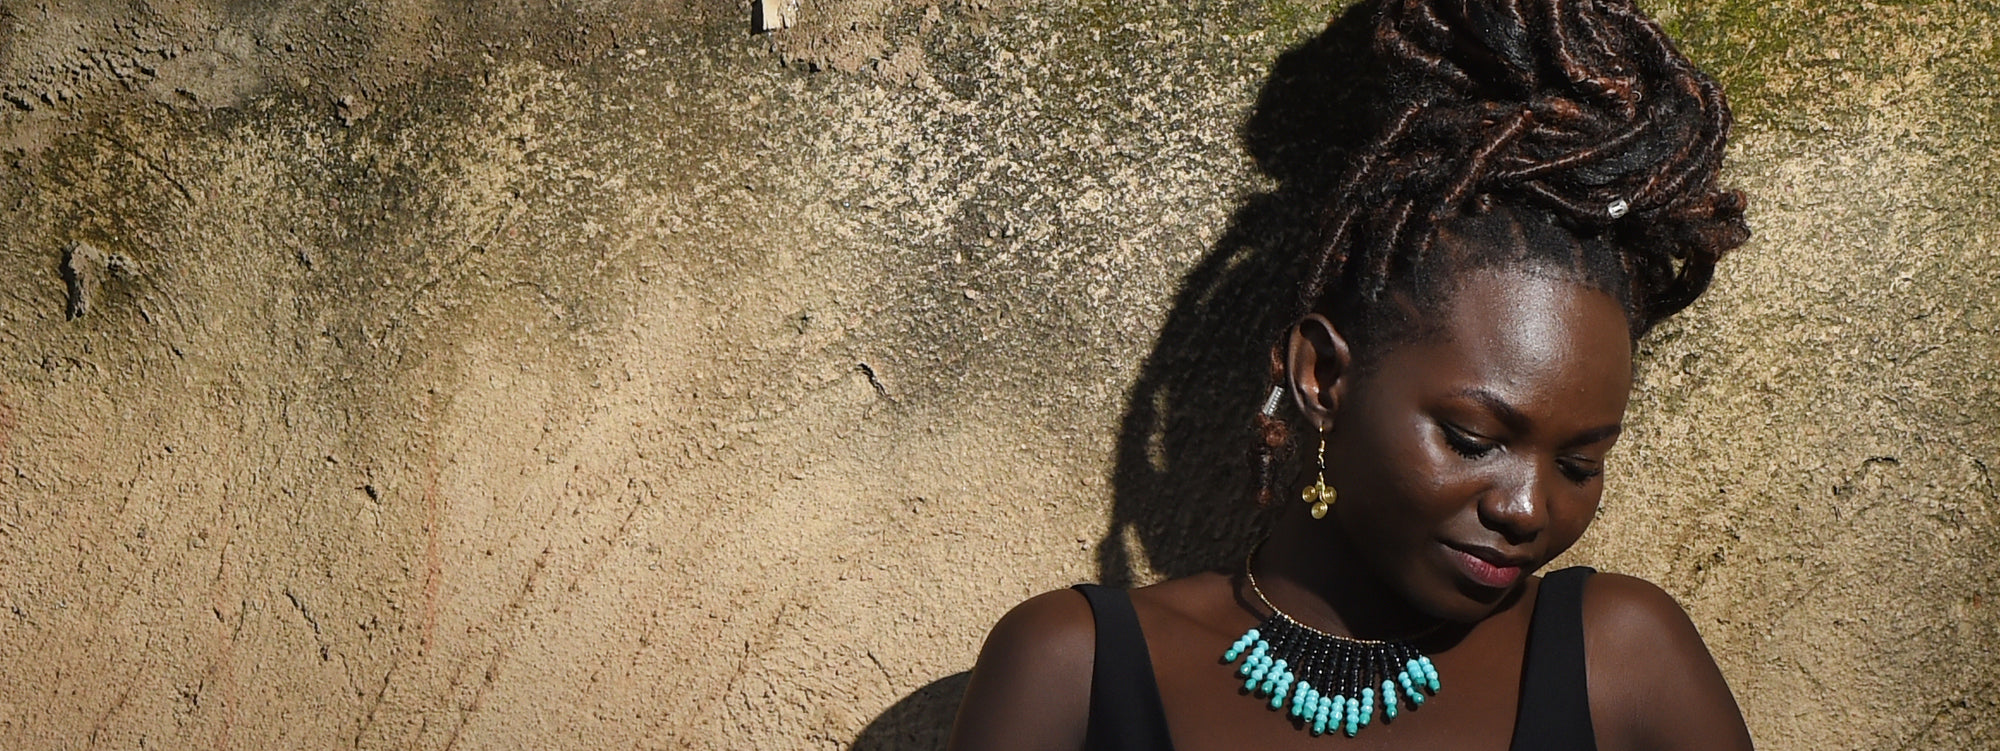 African woman modeling fair trade jewelry made from recycled paper